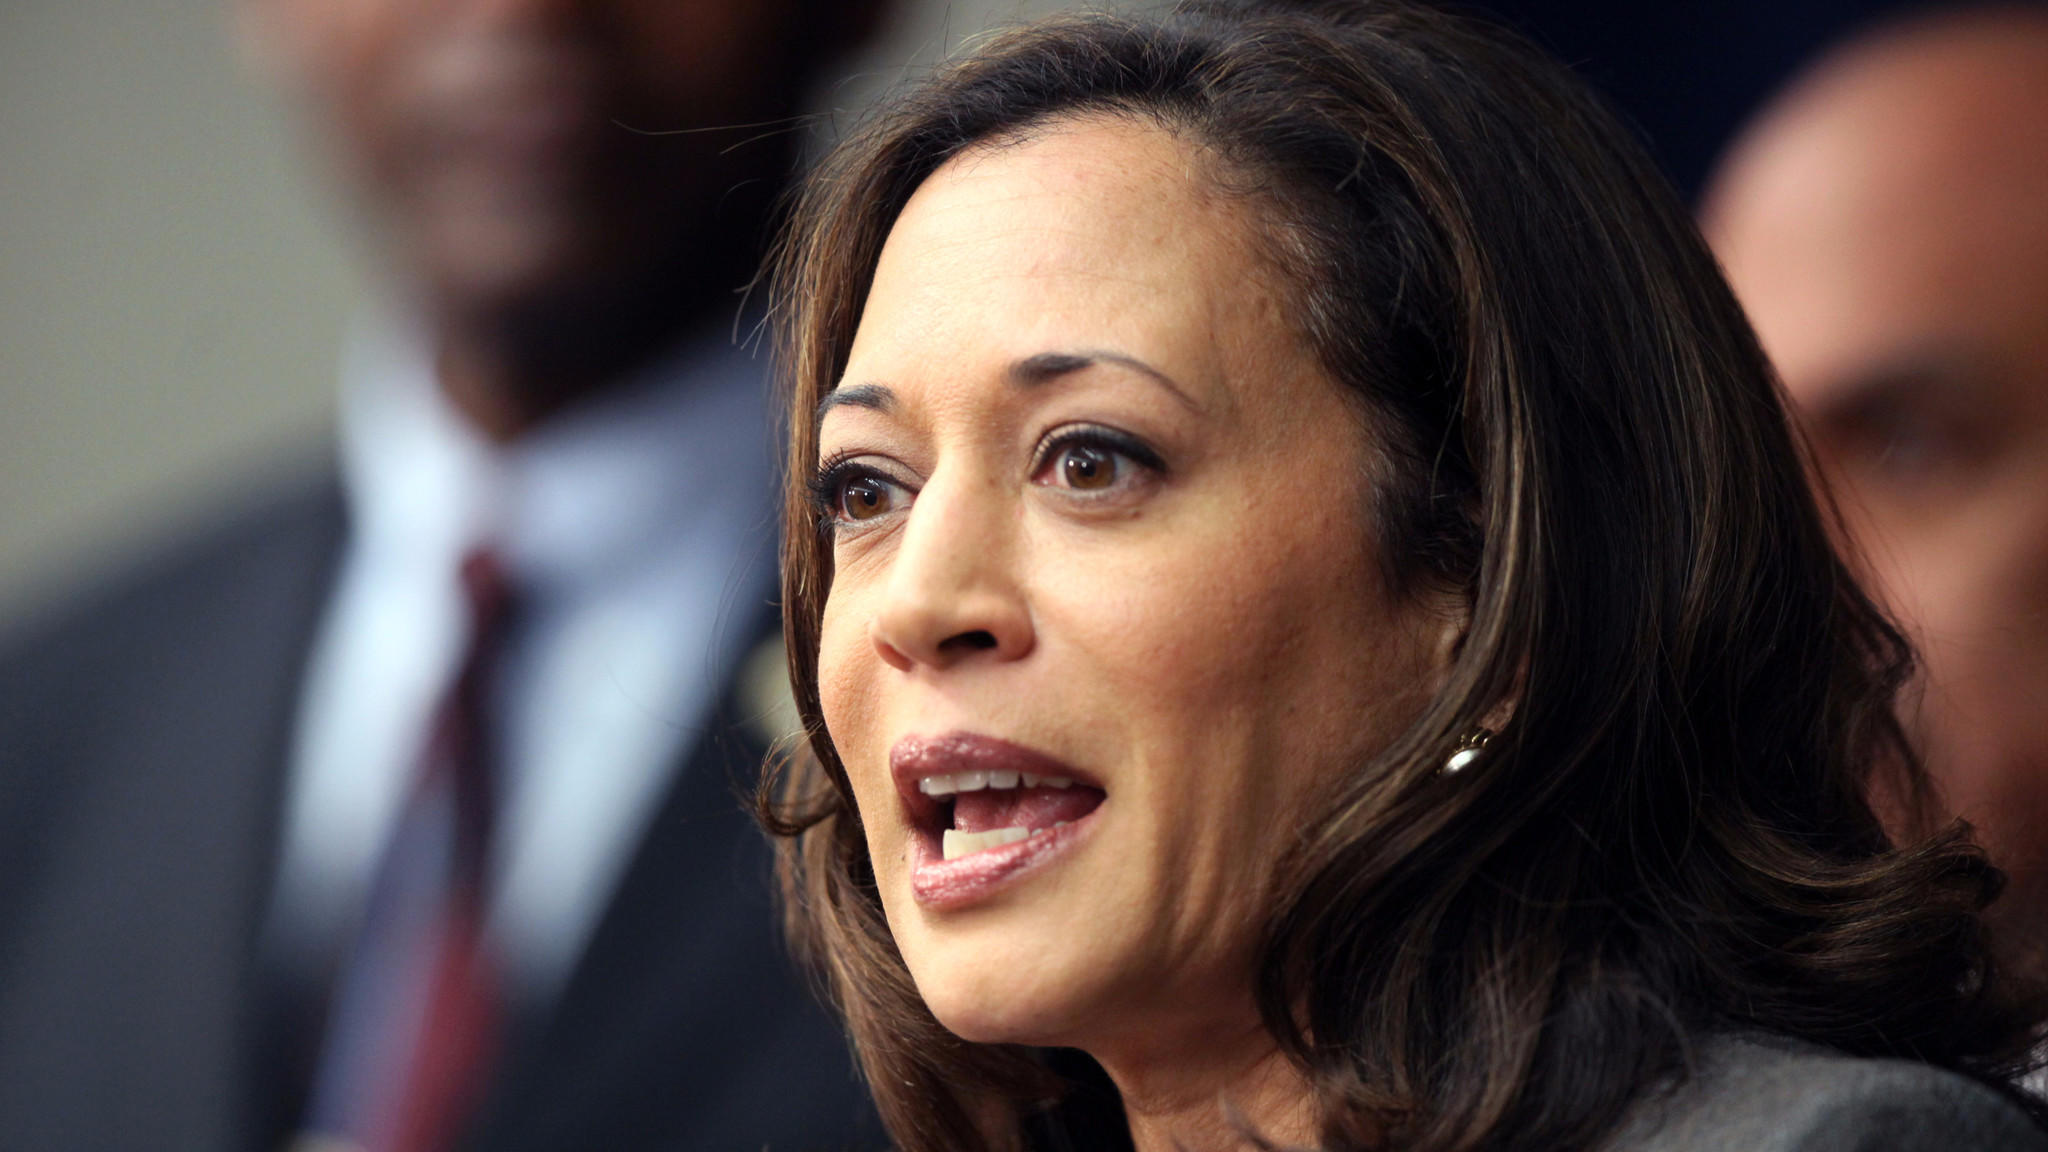 Did Kamala Harris Omit Right to ‘Life’ When Referencing the Declaration of Independence?